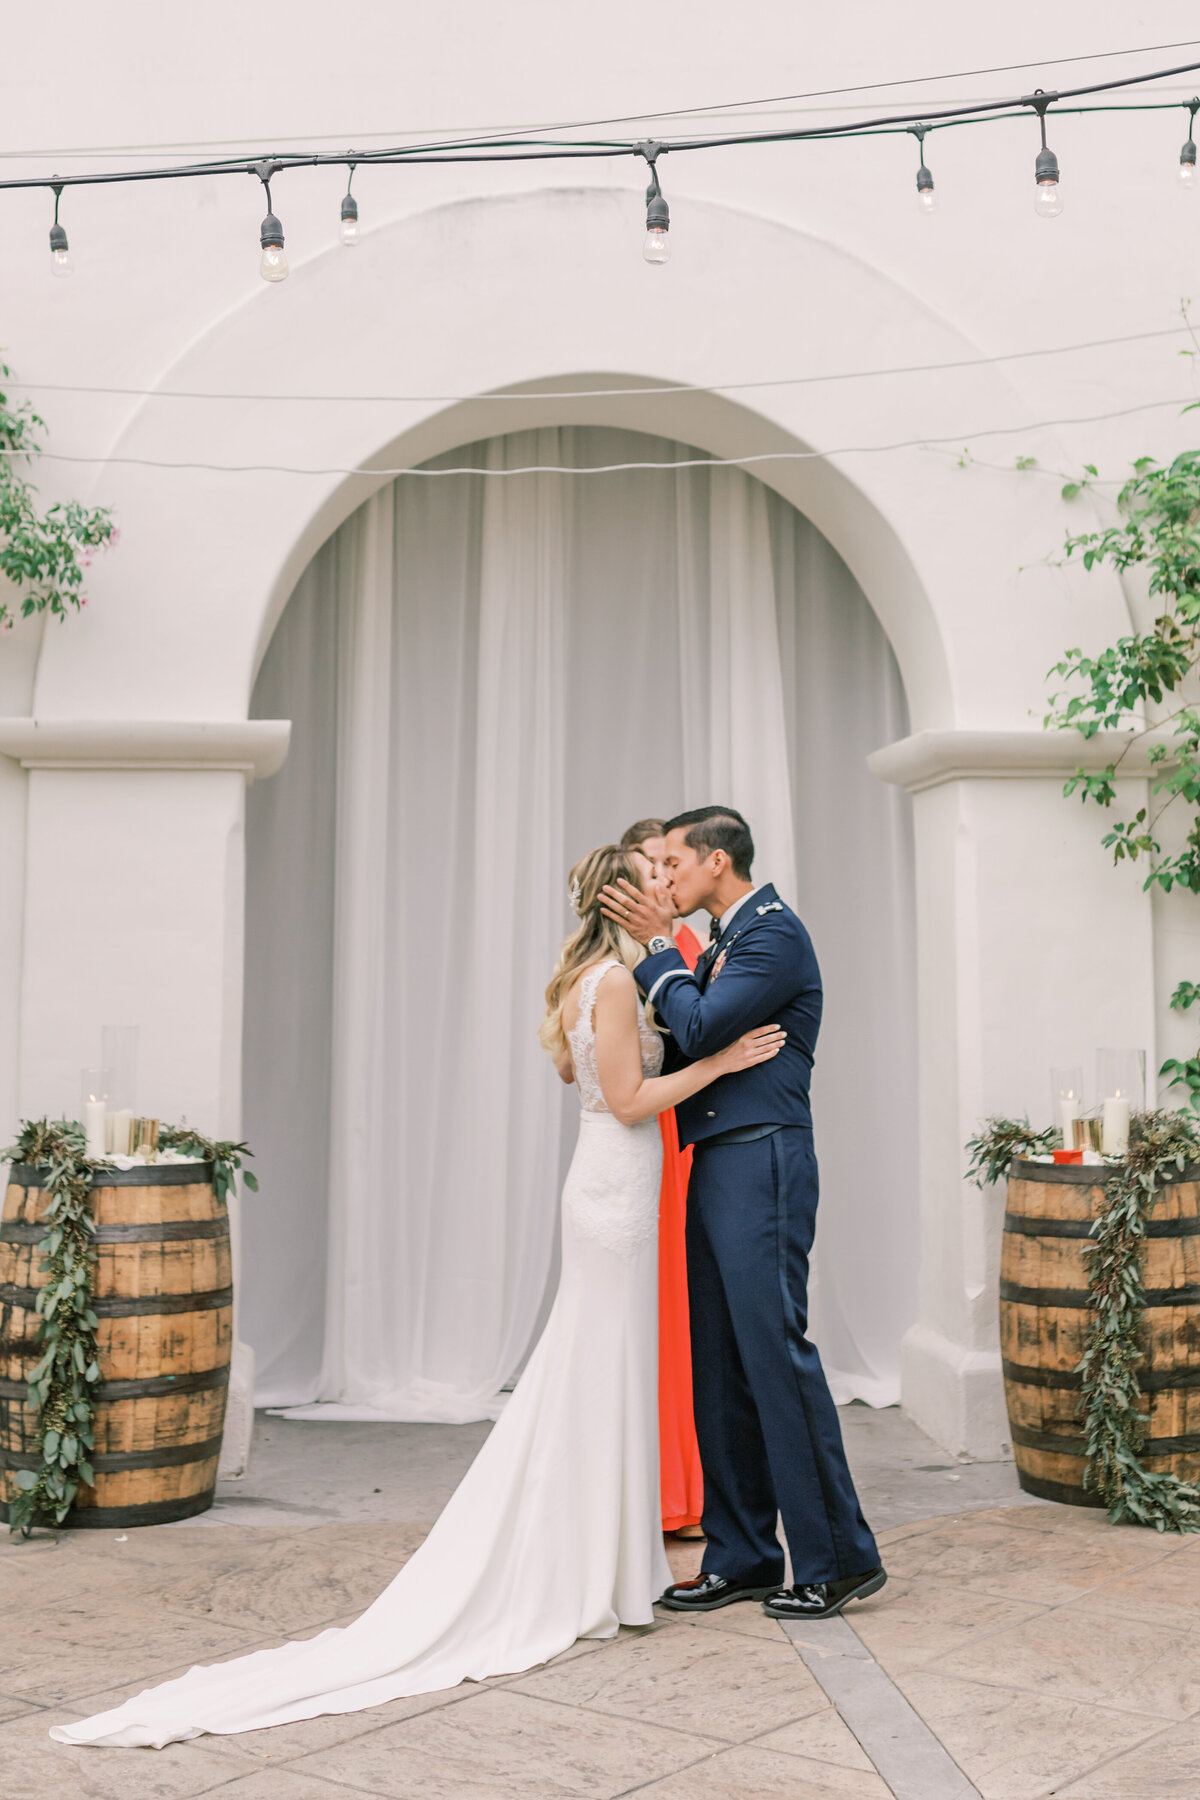 Jocelyn and Spencer Photography California Santa Barbara Wedding Engagement Luxury High End Romantic Imagery Light Airy Fineart Film Style9